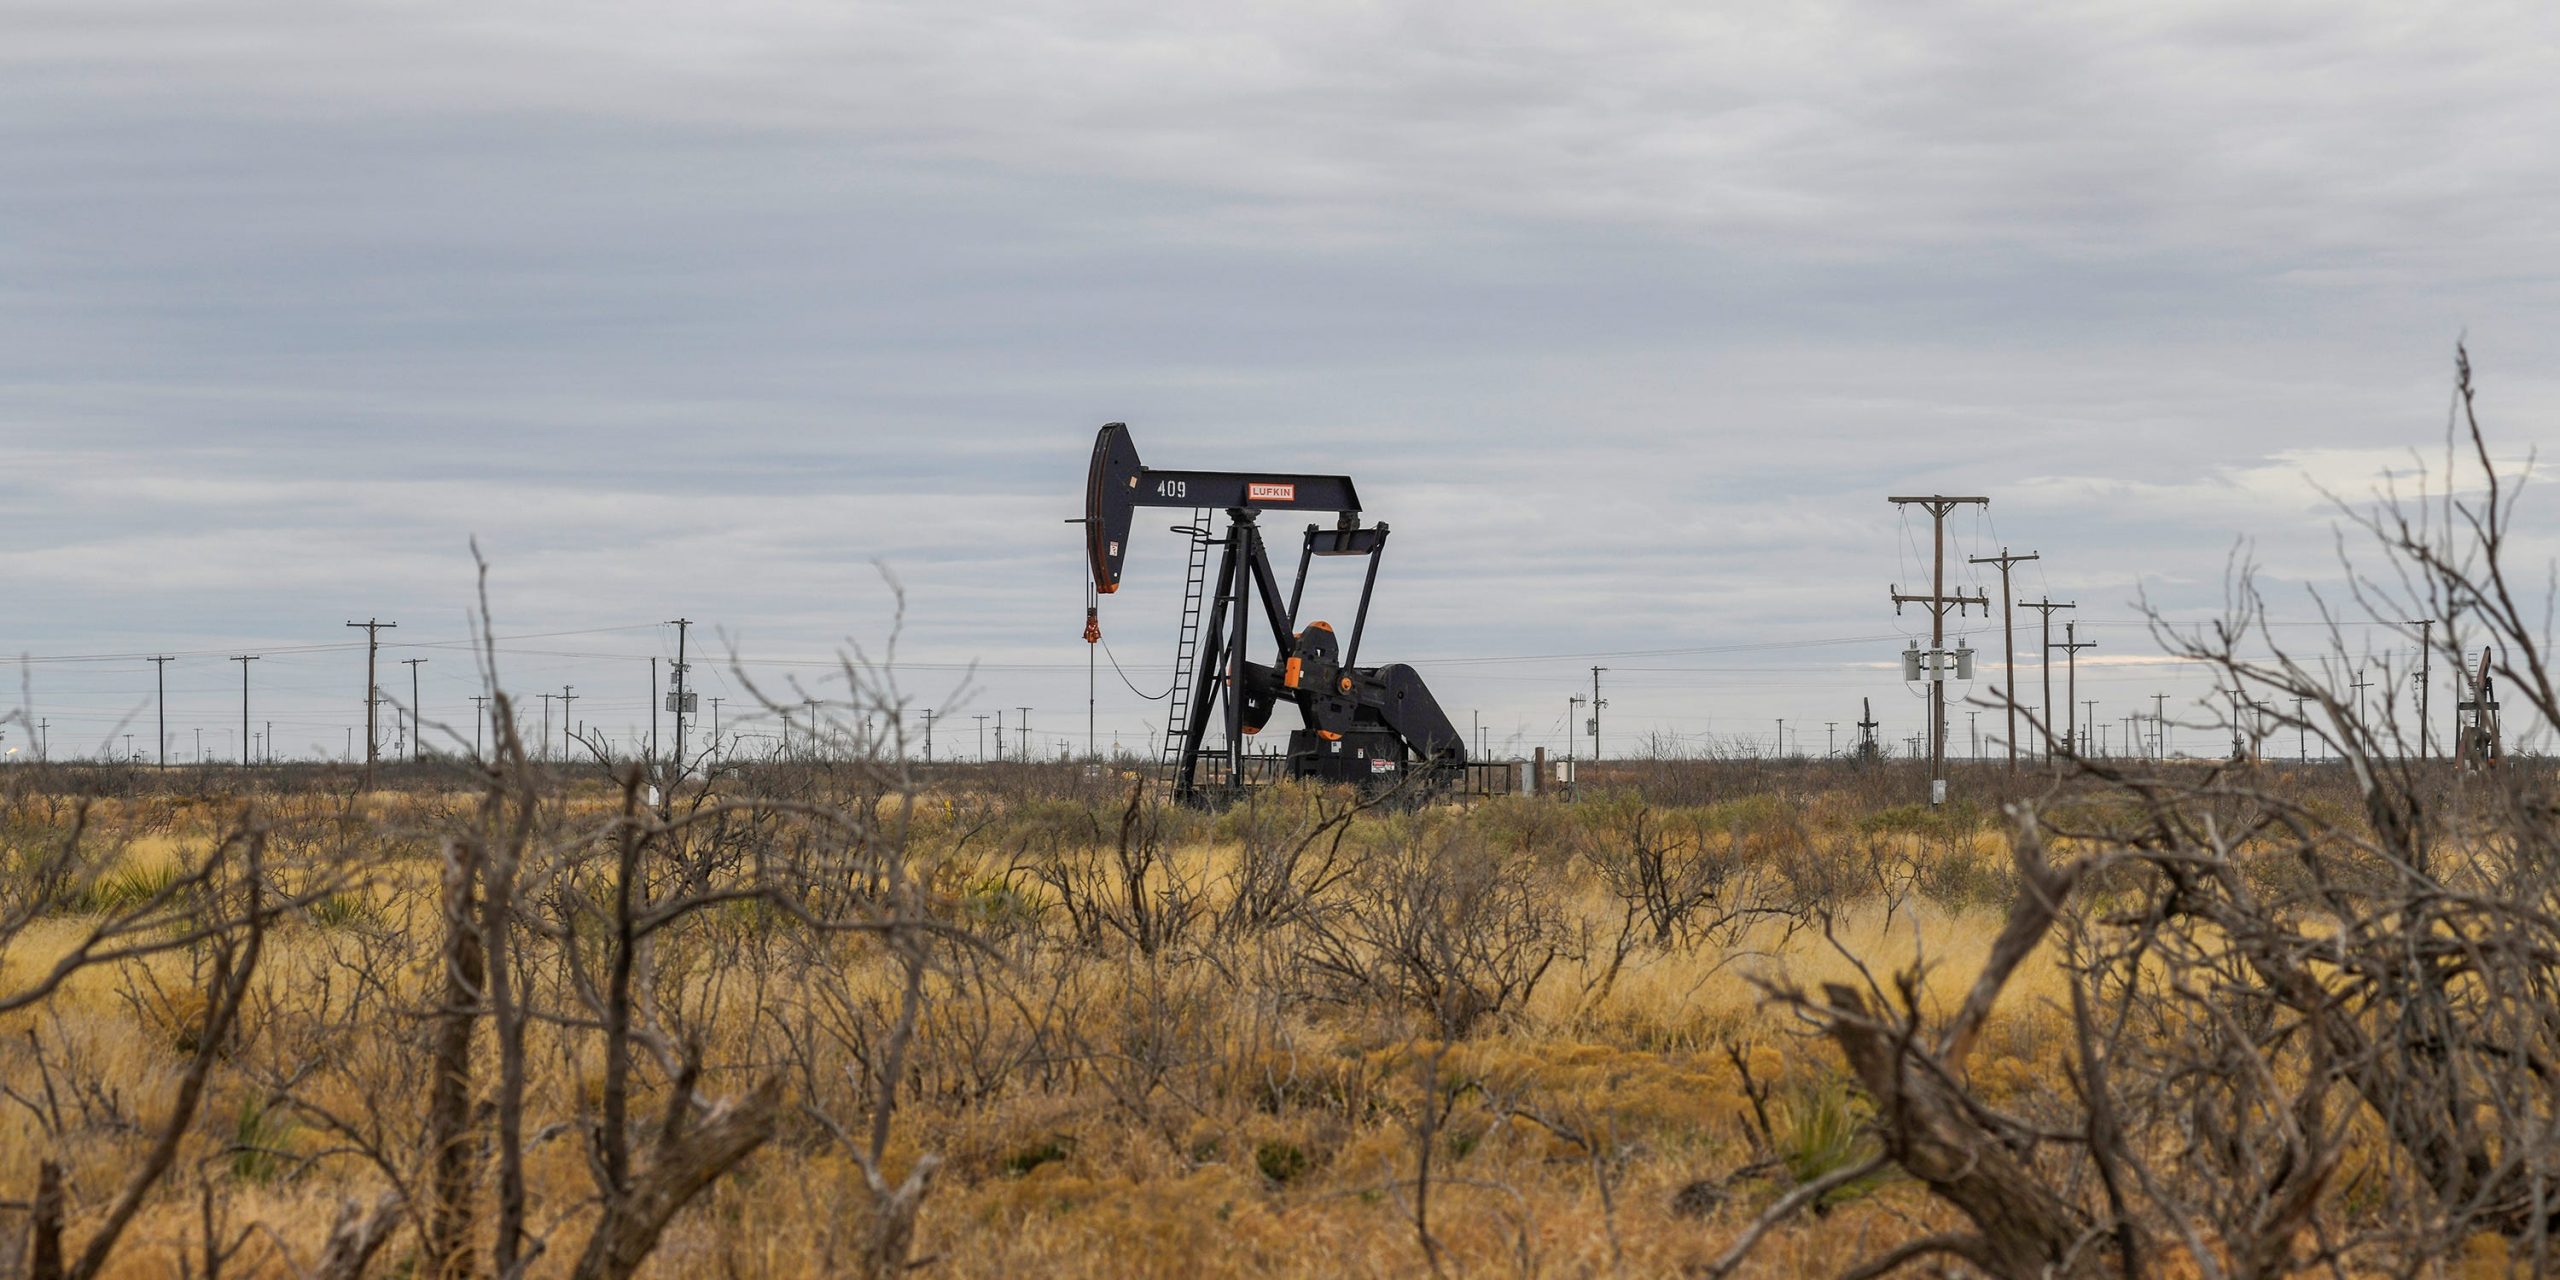 odessa texas pump jack permian basin shale oil gas well ector county texas tx 2019 07 30T000000Z_1760747123_RC14347DC970_RTRMADP_3_USA SHALE INDEPENDENTS.JPG